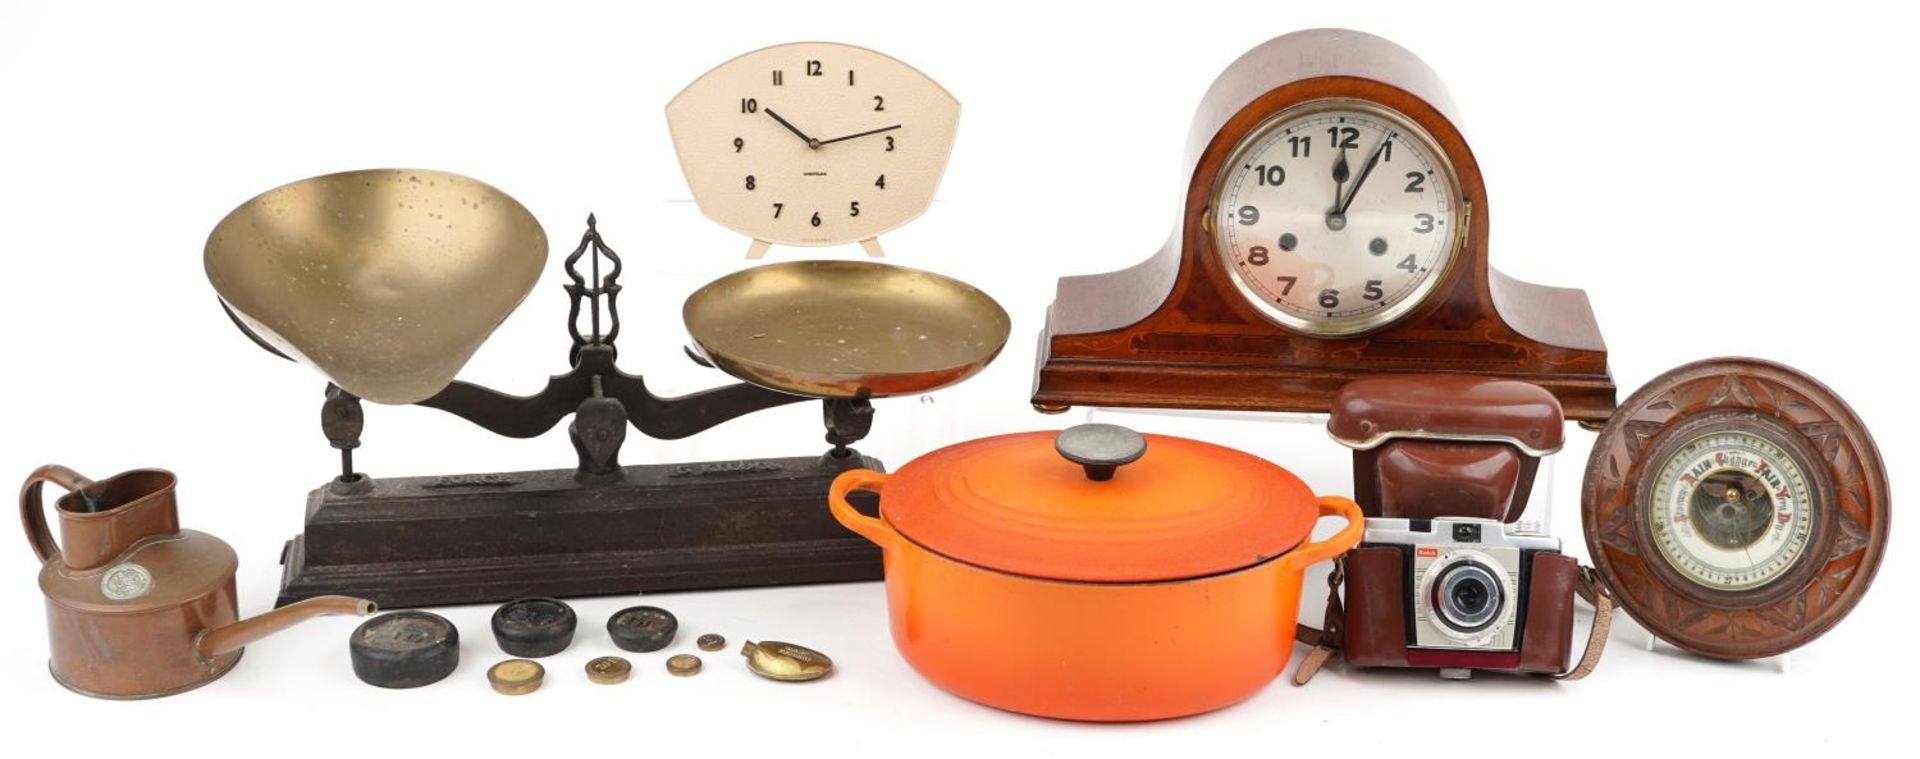 Kitchenalia and sundry items including set of cast iron scales with brass pans, Westminster